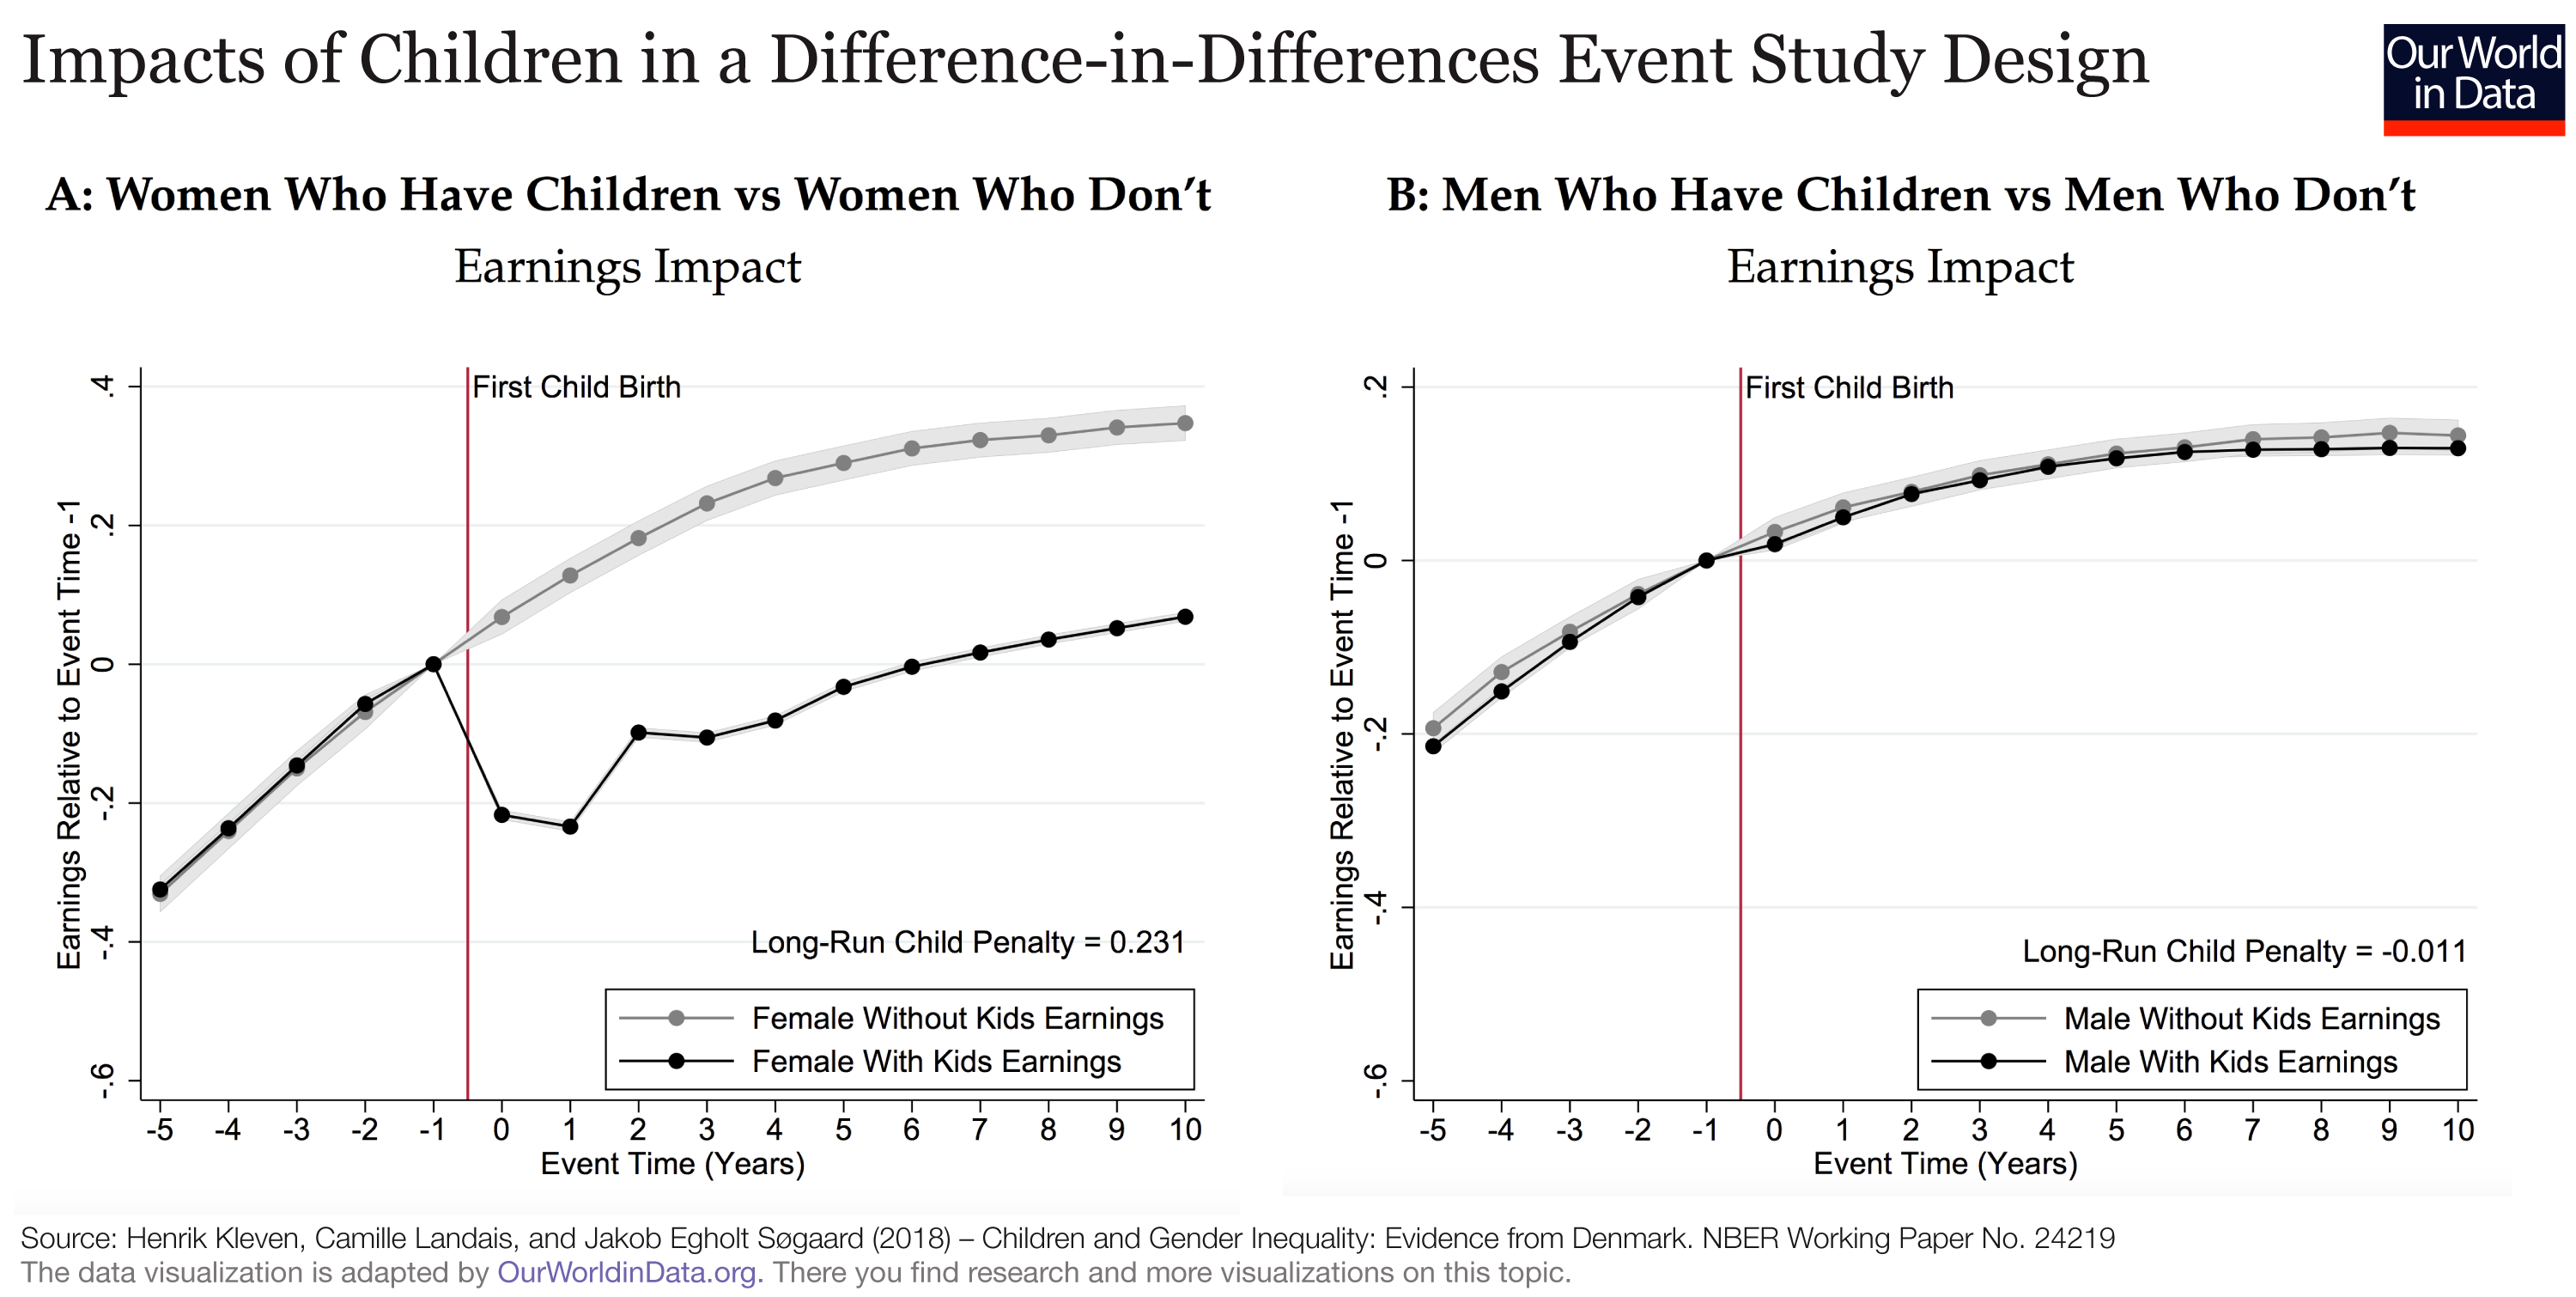 Event study plot of earnings before and after the birth of the first child for men and women, relative to men and women who sought to have children but did not. Women who have children have lower earnings up to ten years after having children, relative to women who did not have children. There is no difference for men.